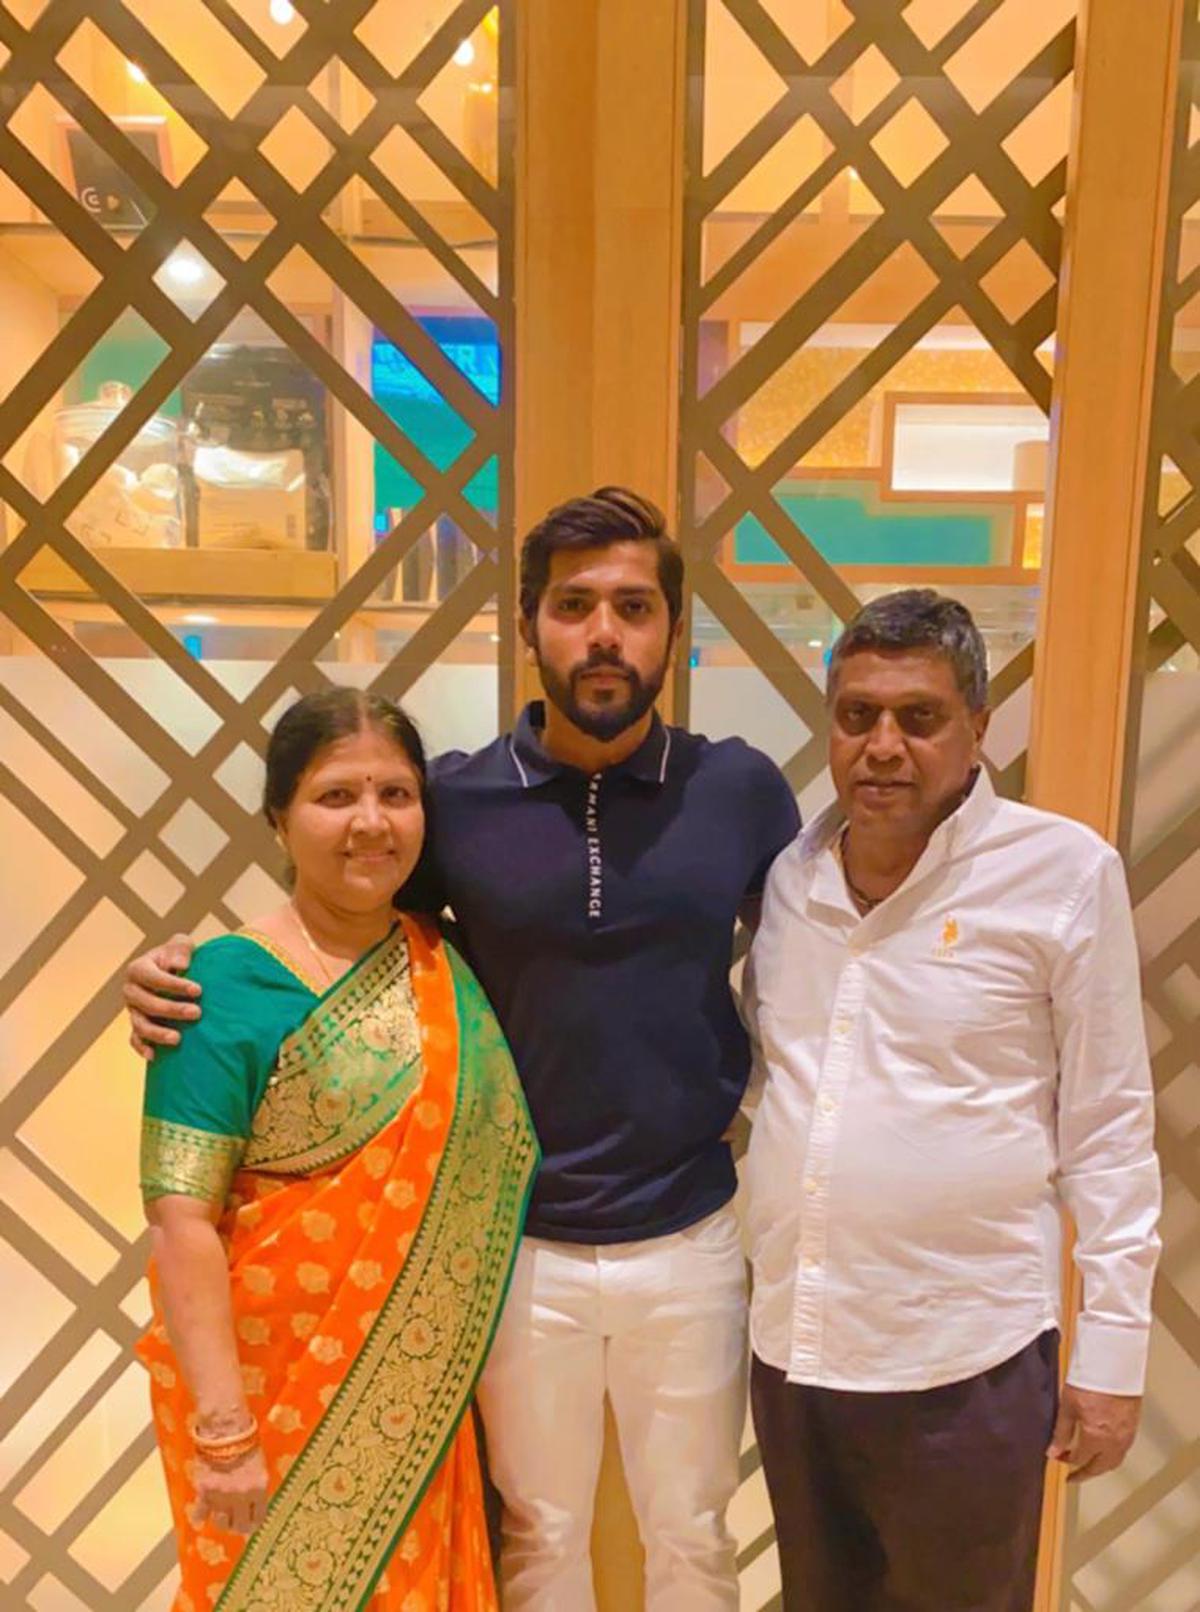  T. Ravi Teja along with his parents